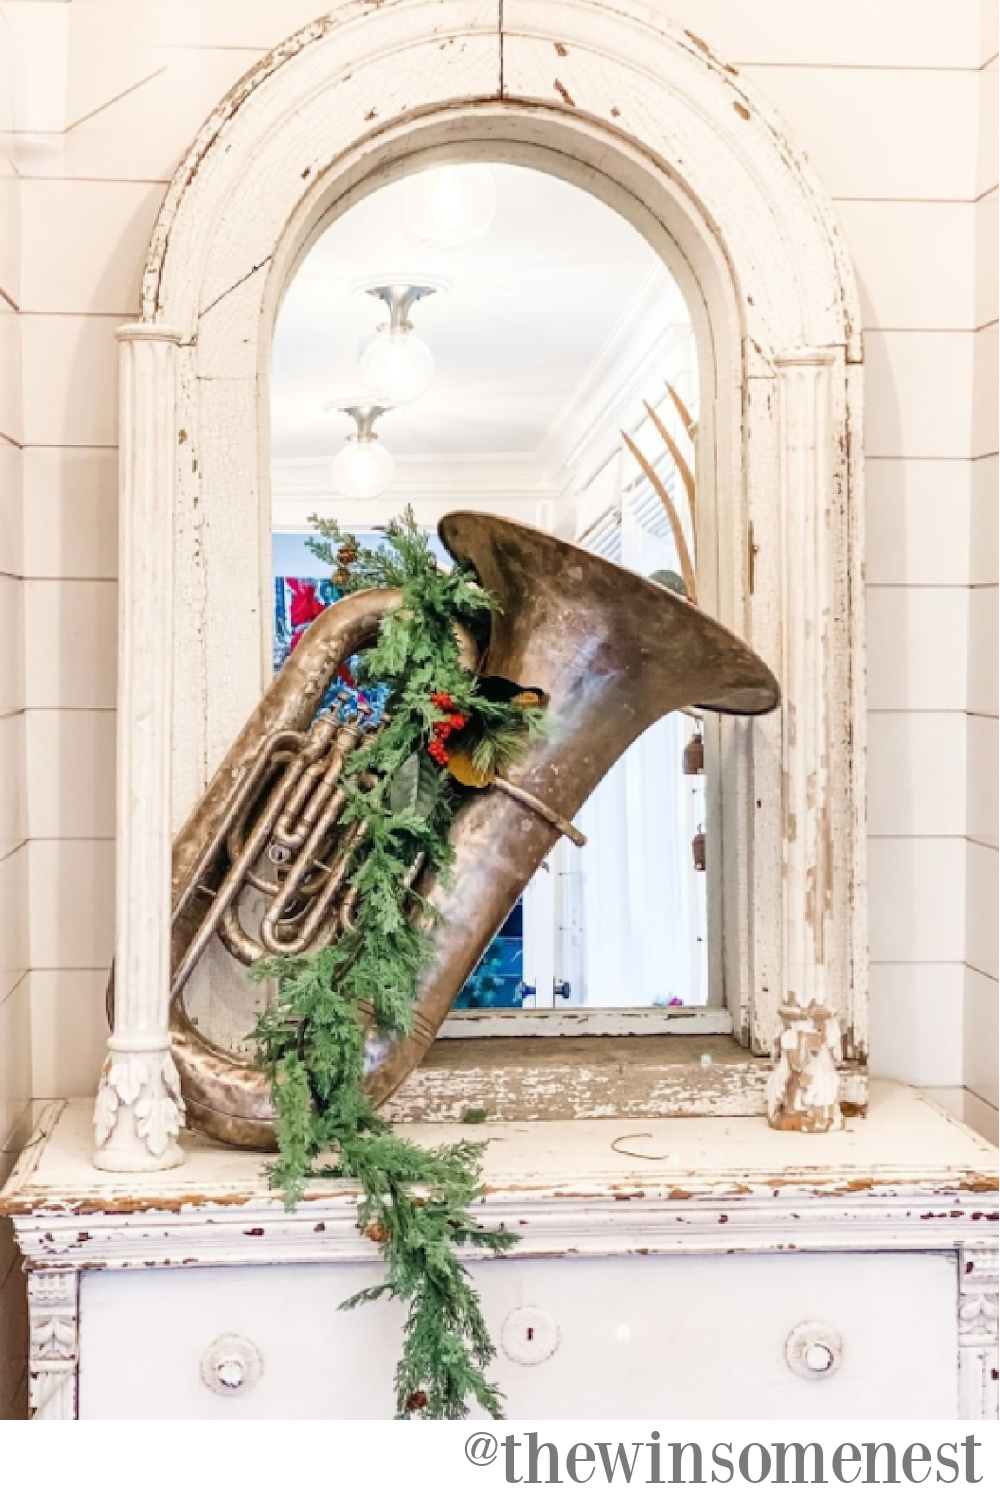 Tuba decorated for Christmas in a shabby chic home - The Winsome Nest. #christmasdecor #frenchcountrychristmas